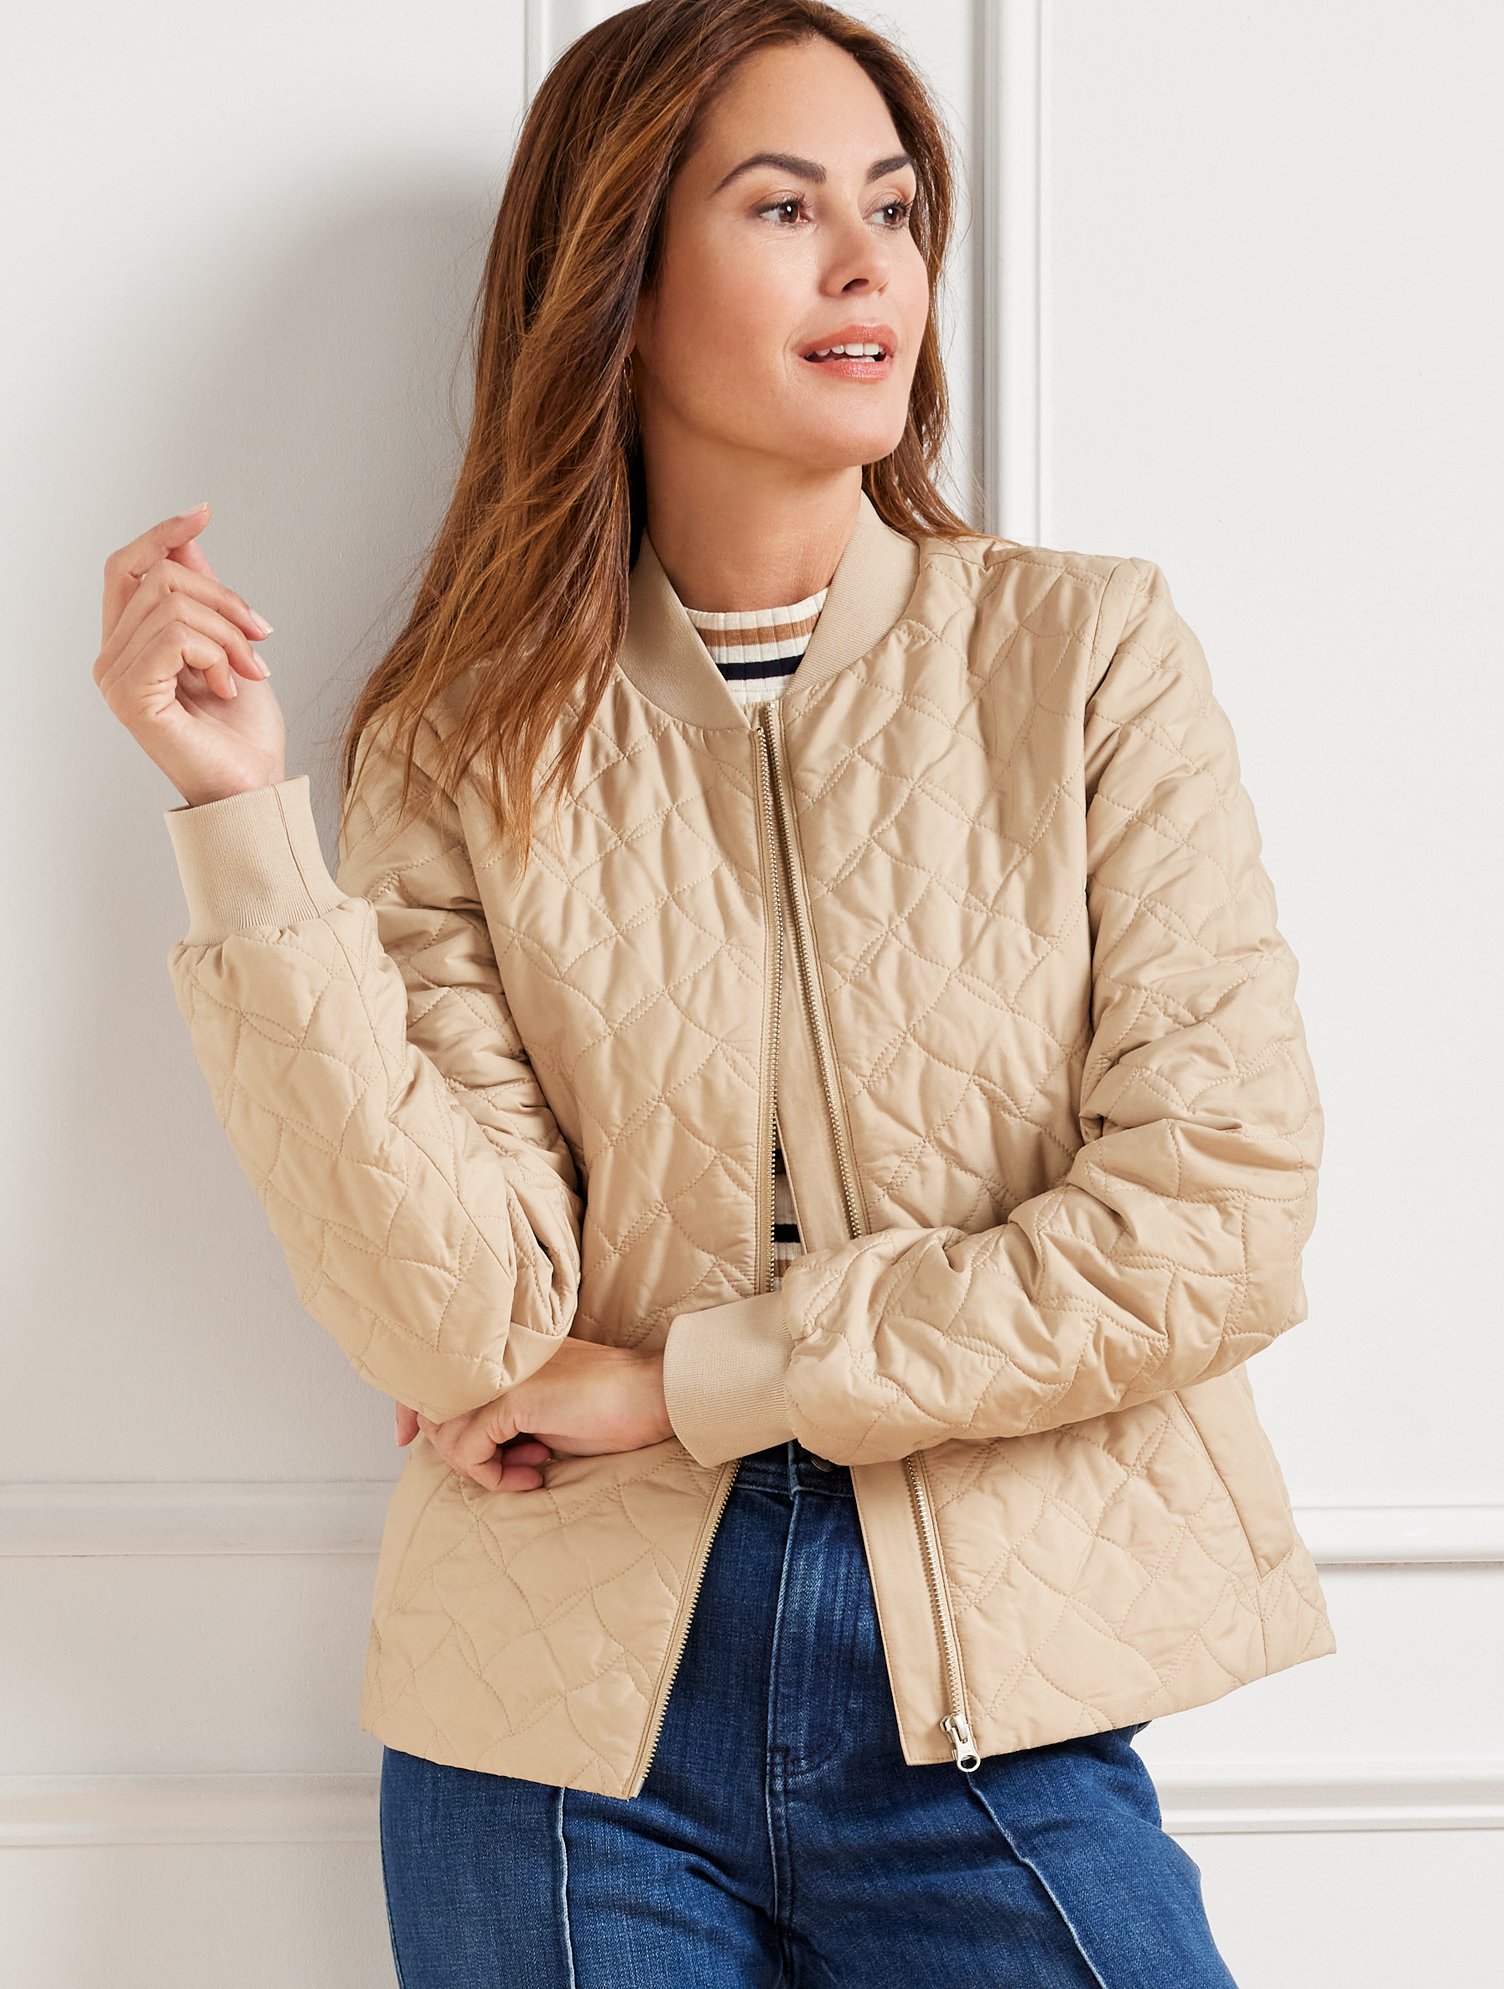 Talbots Plus Size - Quilted Bomber Jacket - Fawn - 2x